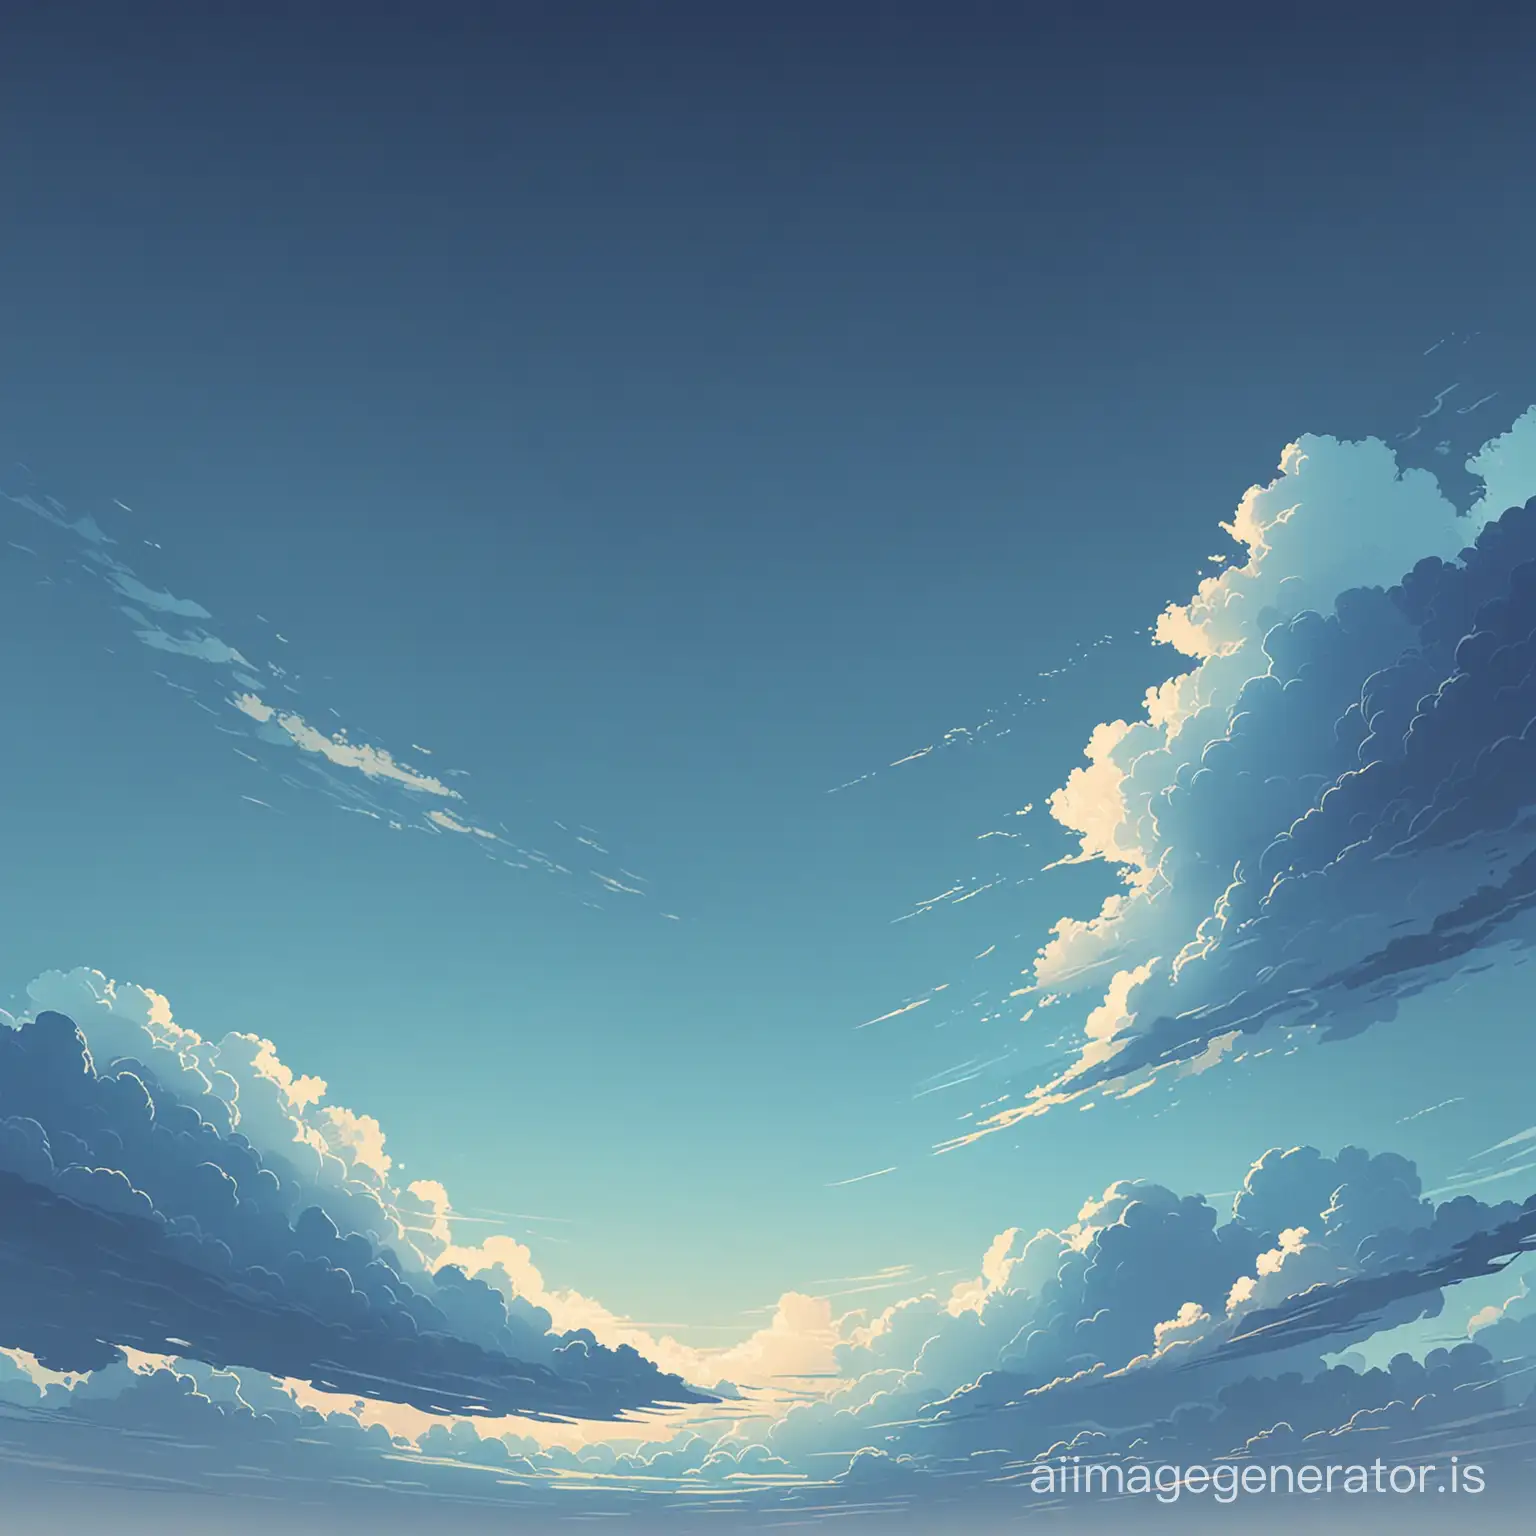 blue sky gradient, illustration style, with distant clouds